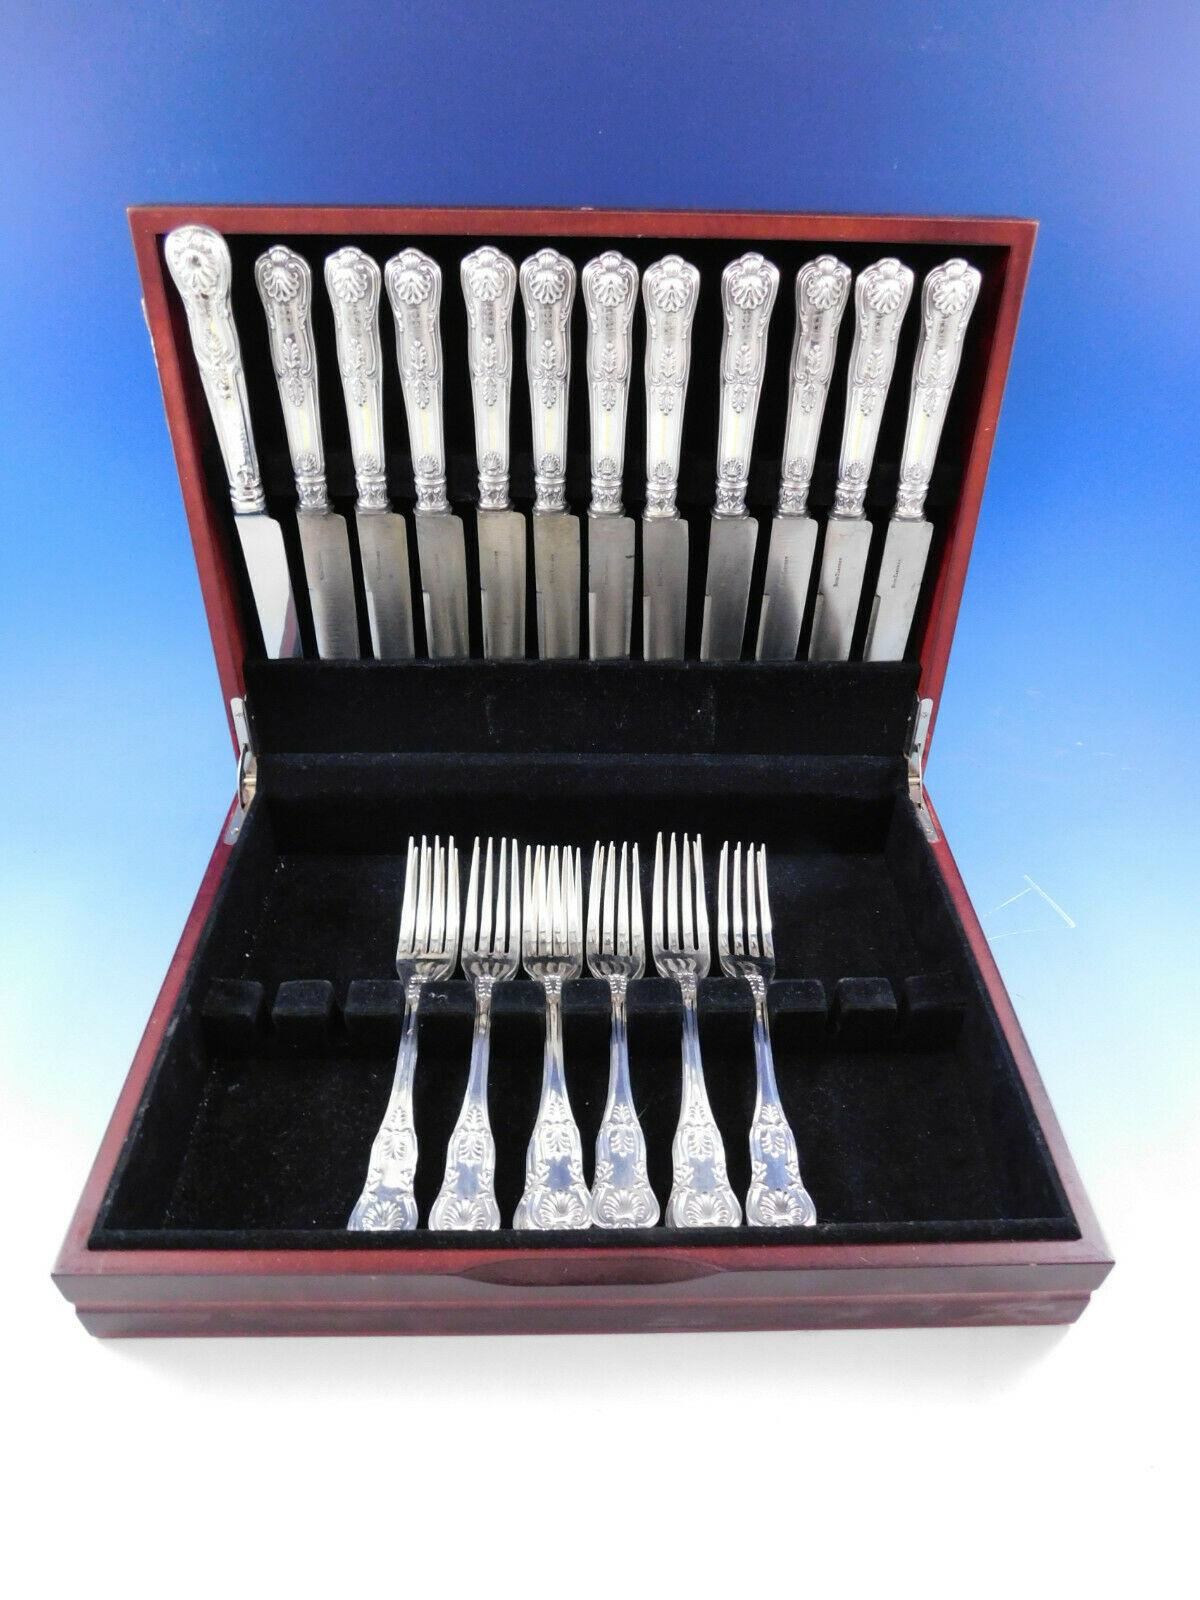 Queens by Henri Bros & Co. (France) sterling silver set, 24 pieces. This set includes:

12 dinner knives, hollow handle with steel blades, 10